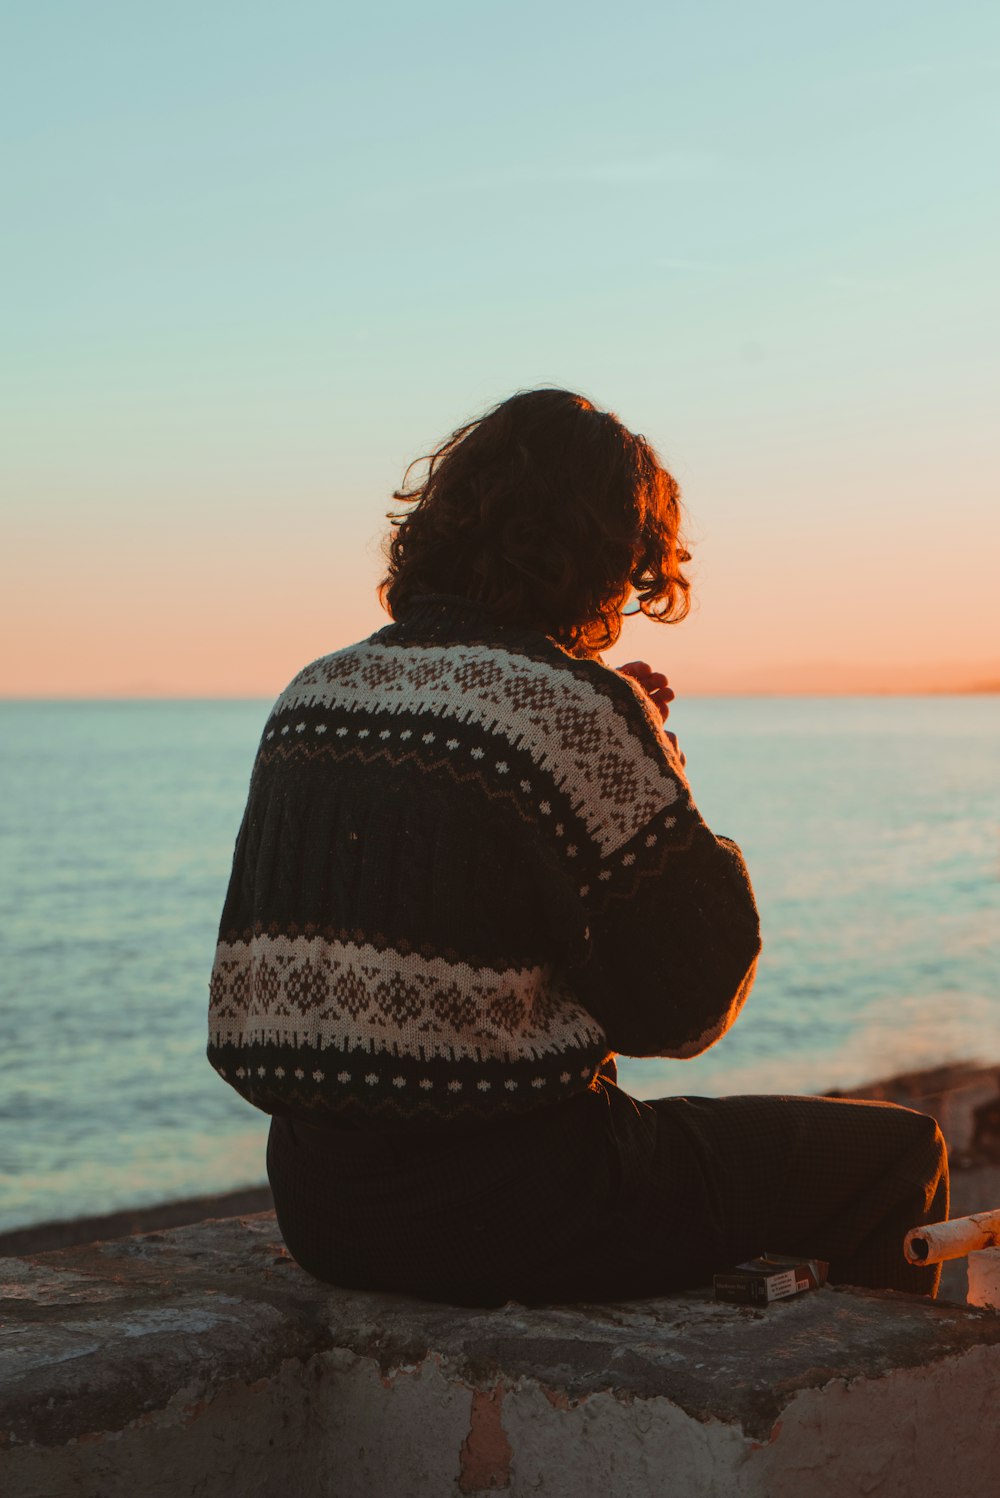 person in black and white sweater sitting on beach shore during sunset